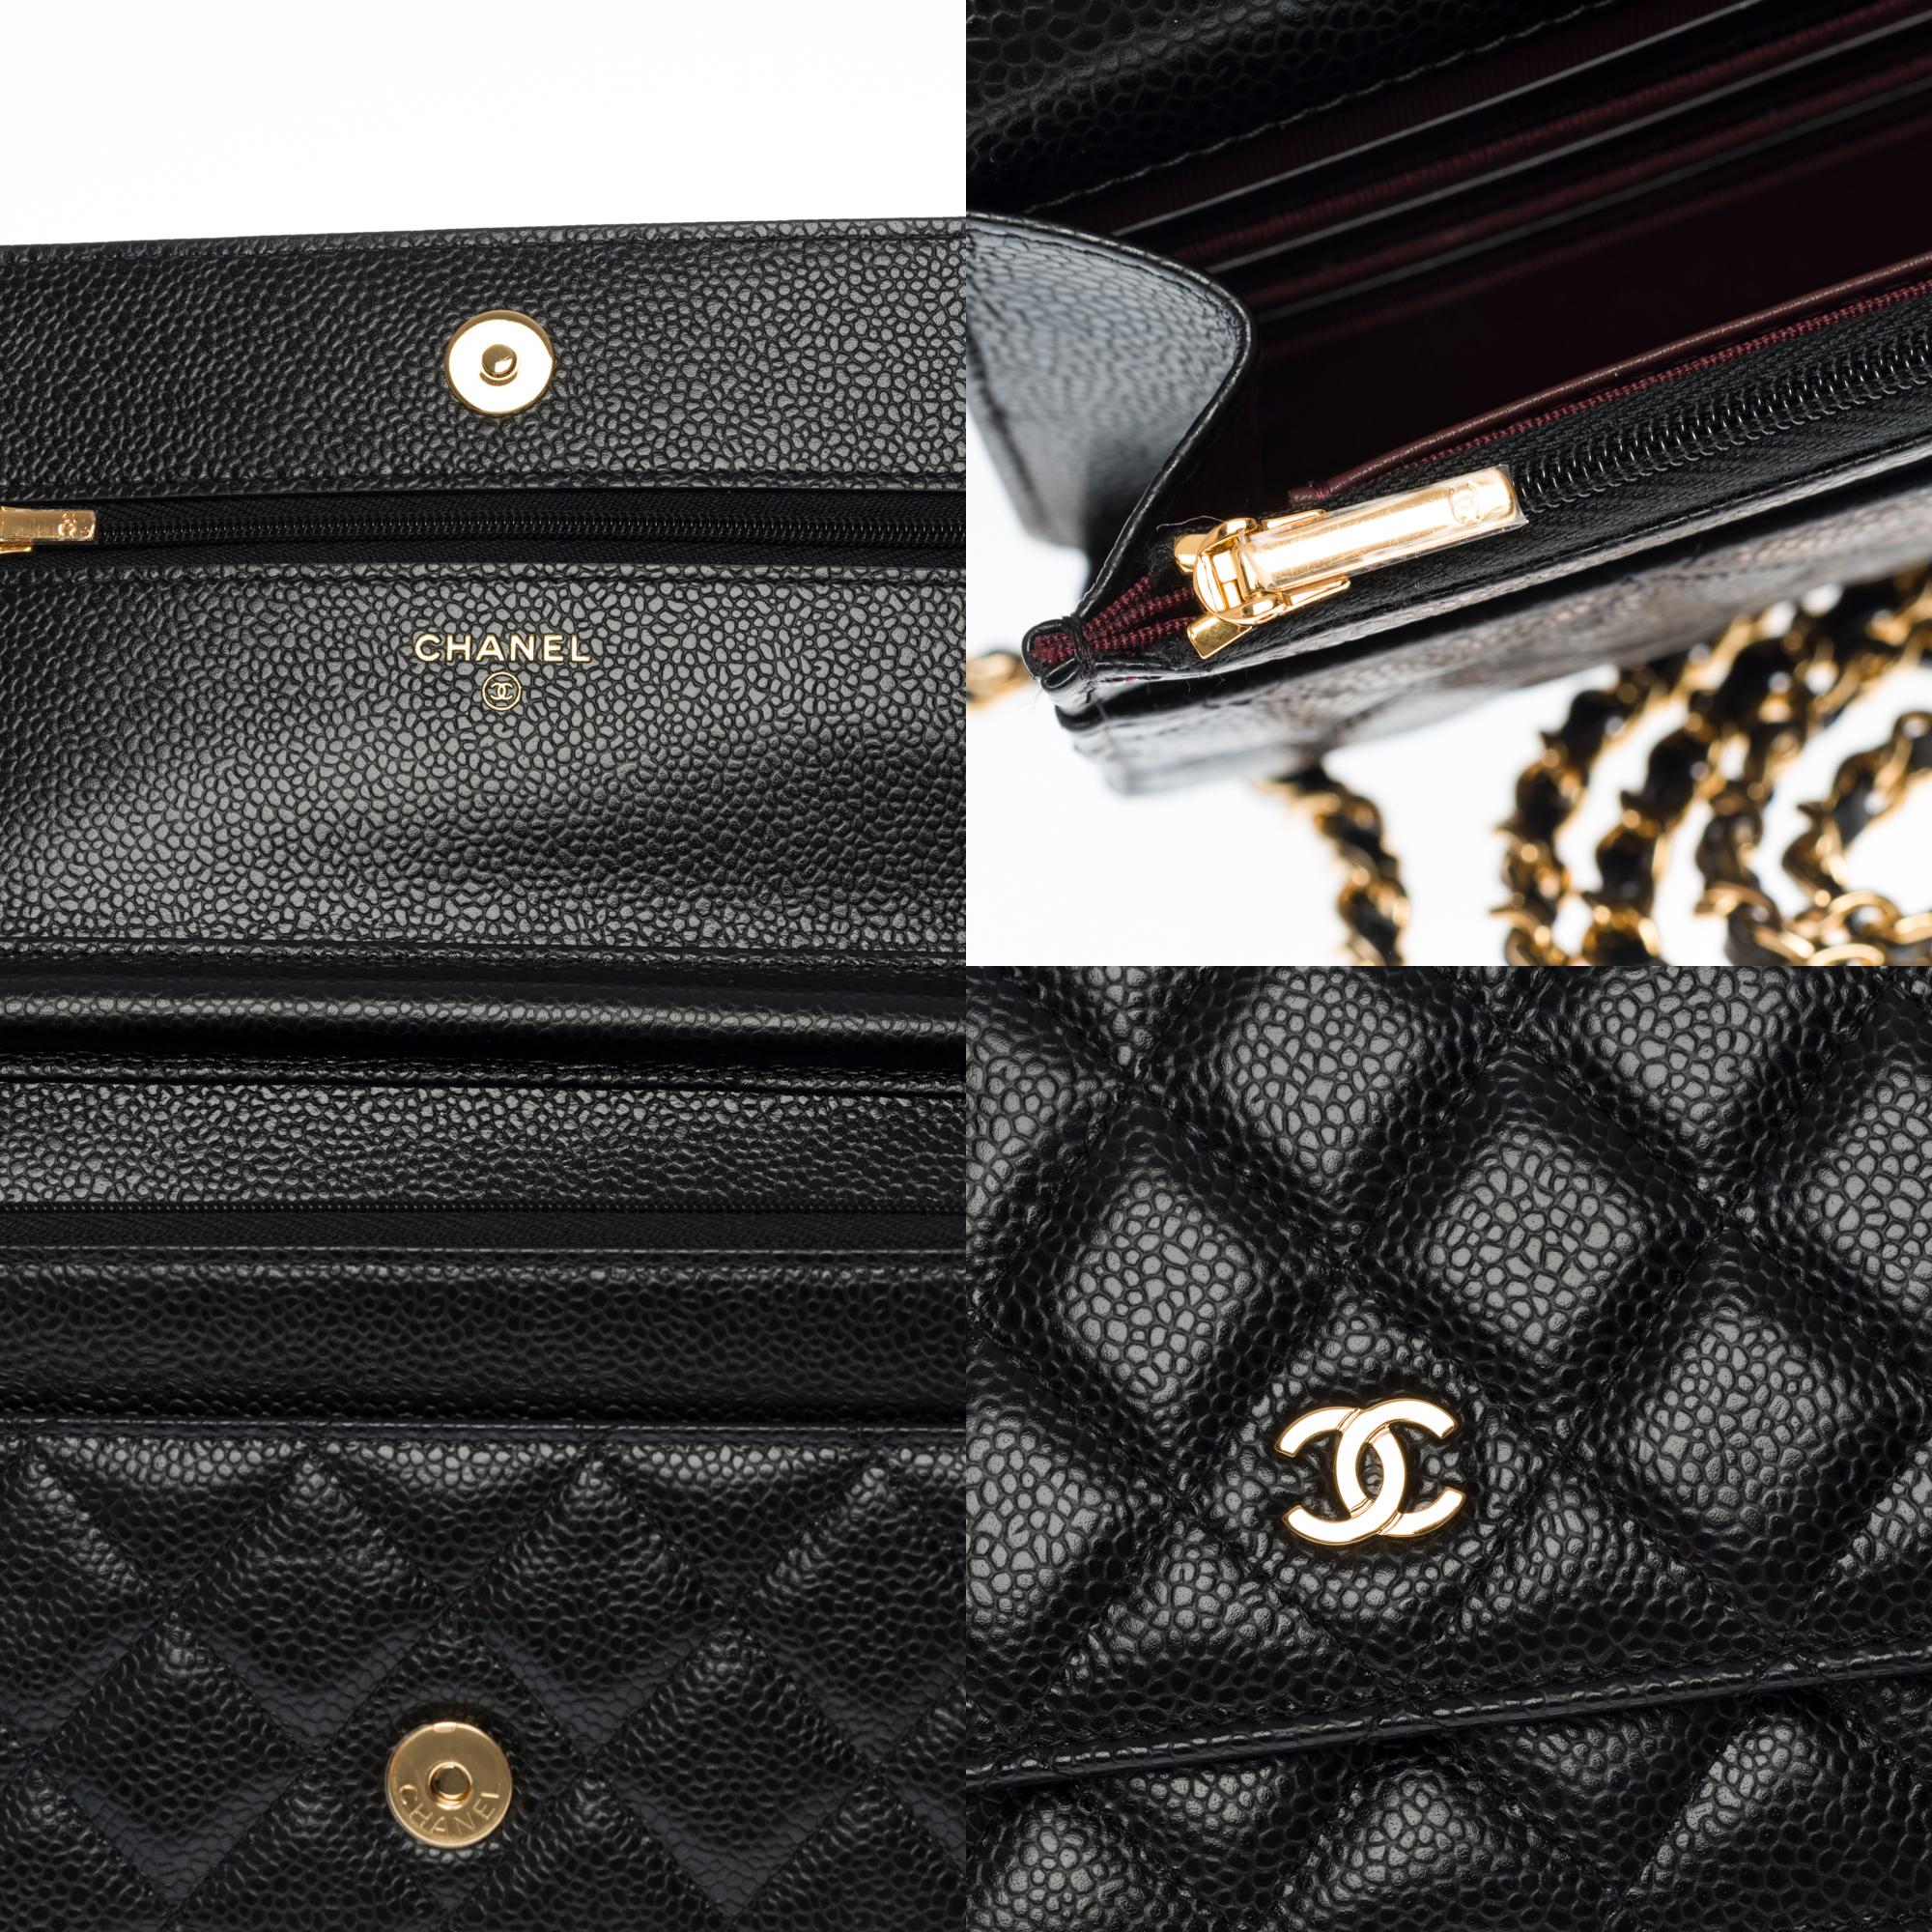 Chanel Wallet on Chain (WOC)  shoulder bag in black Caviar quilted leather, GHW 1